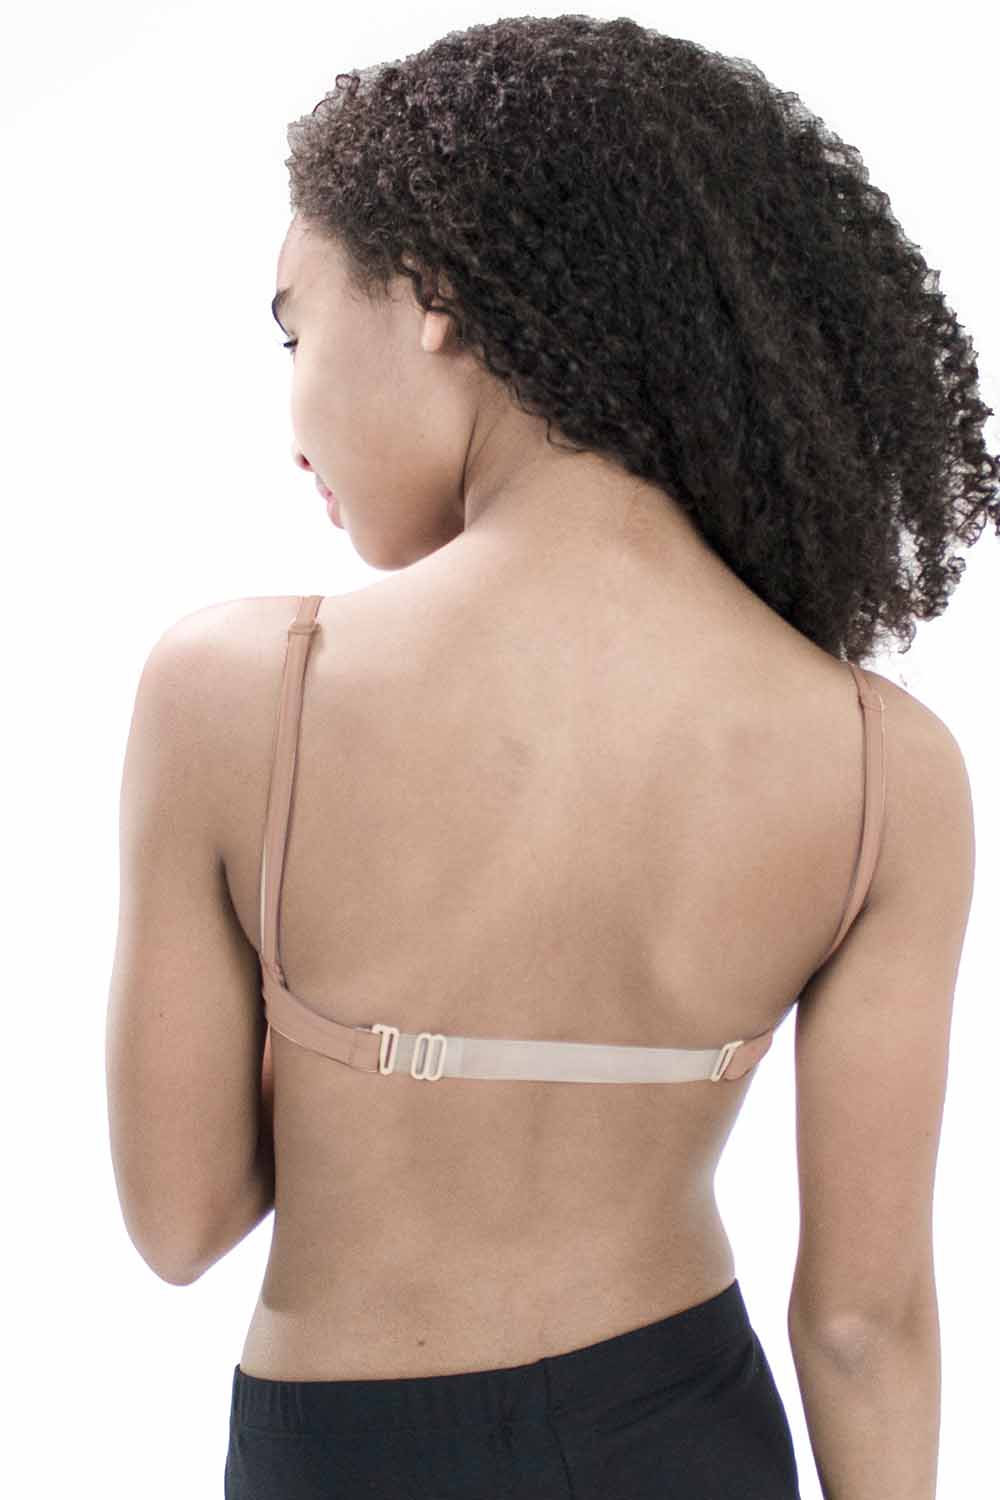 Pack of 2-Imported Transparent Bras Back Straps For Women/Girls p